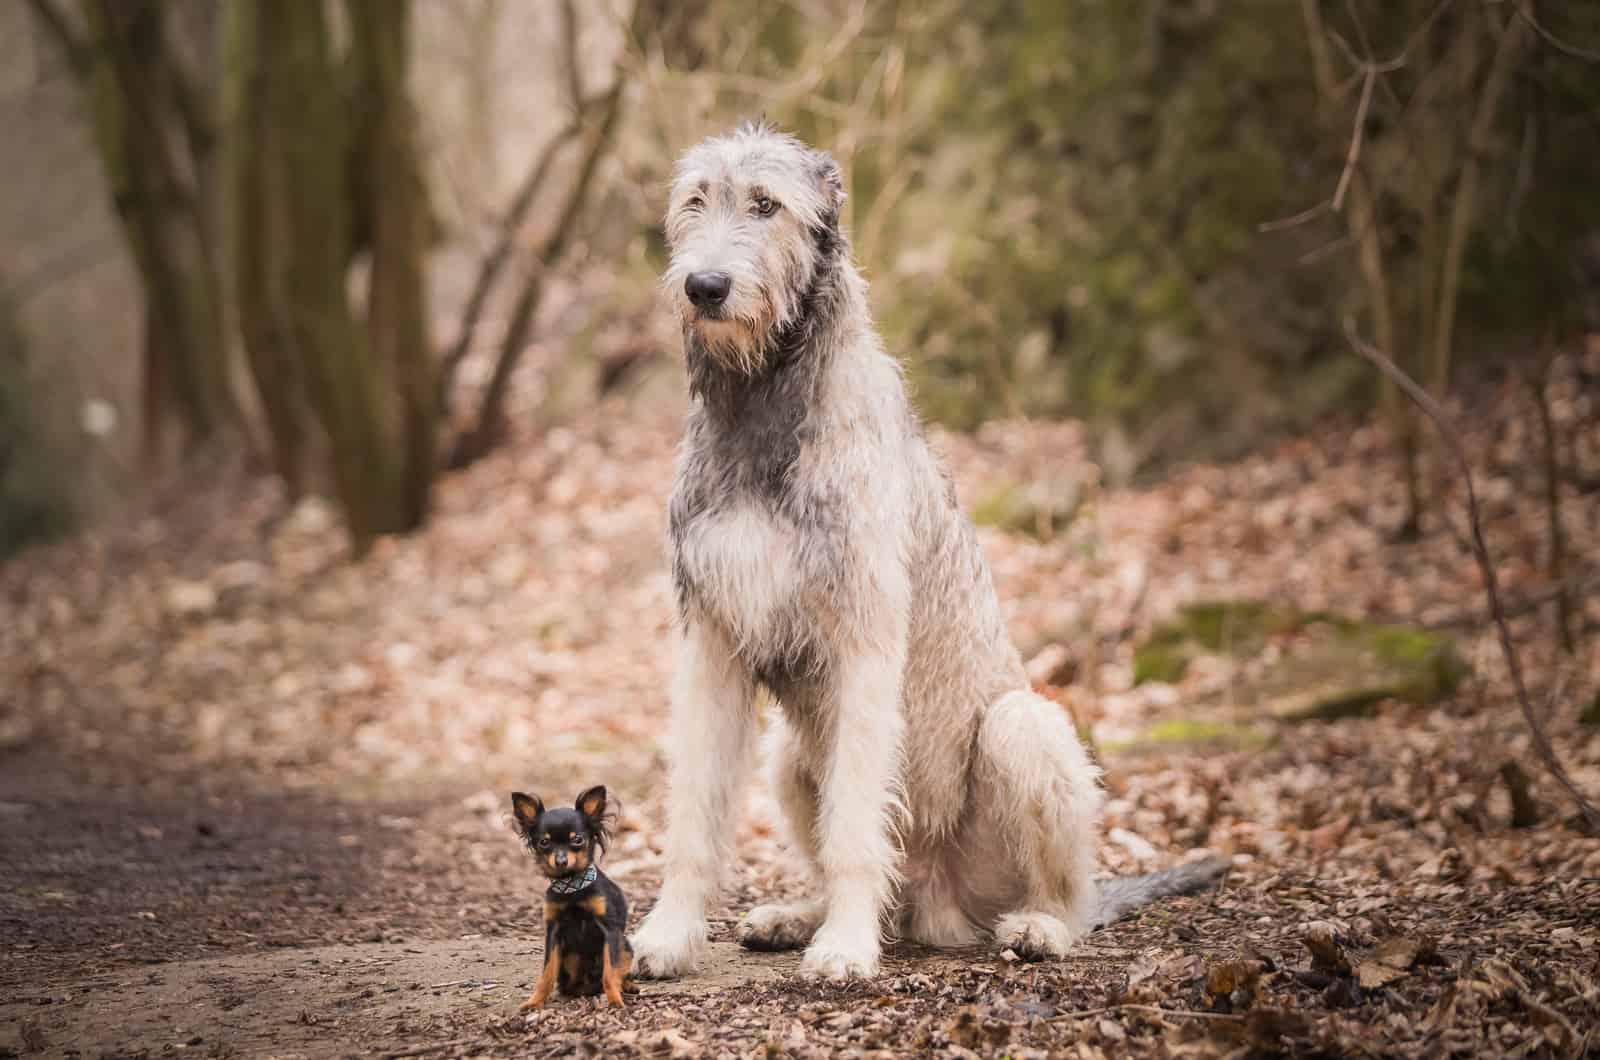 big dog and a small dog standing side by side